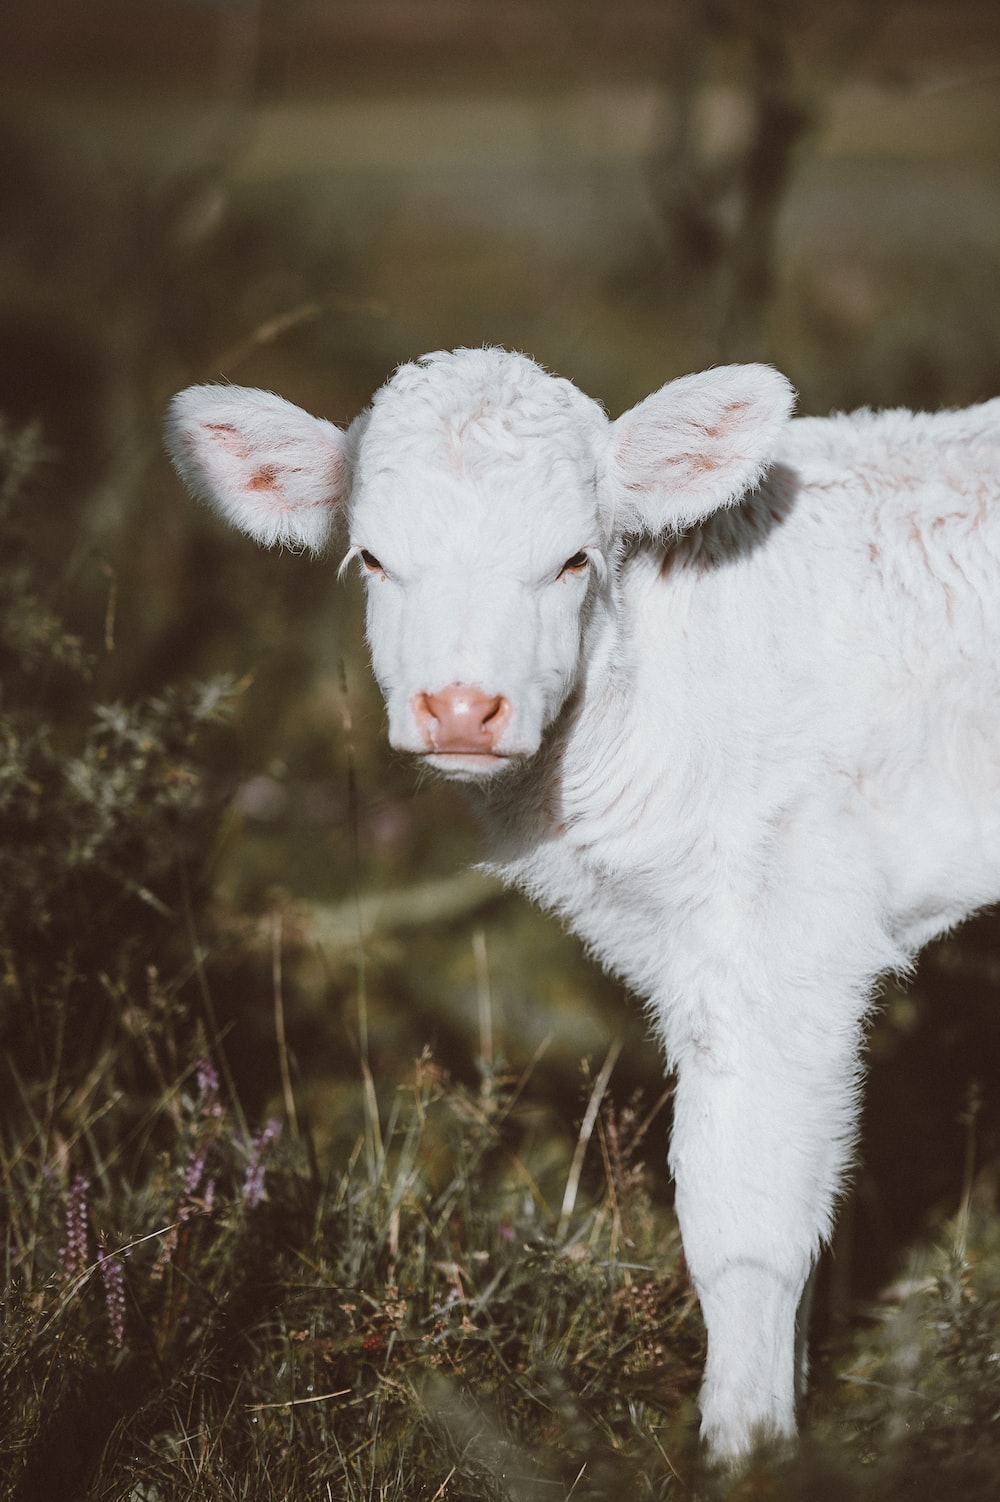 Baby Cows Picture. Download Free Image